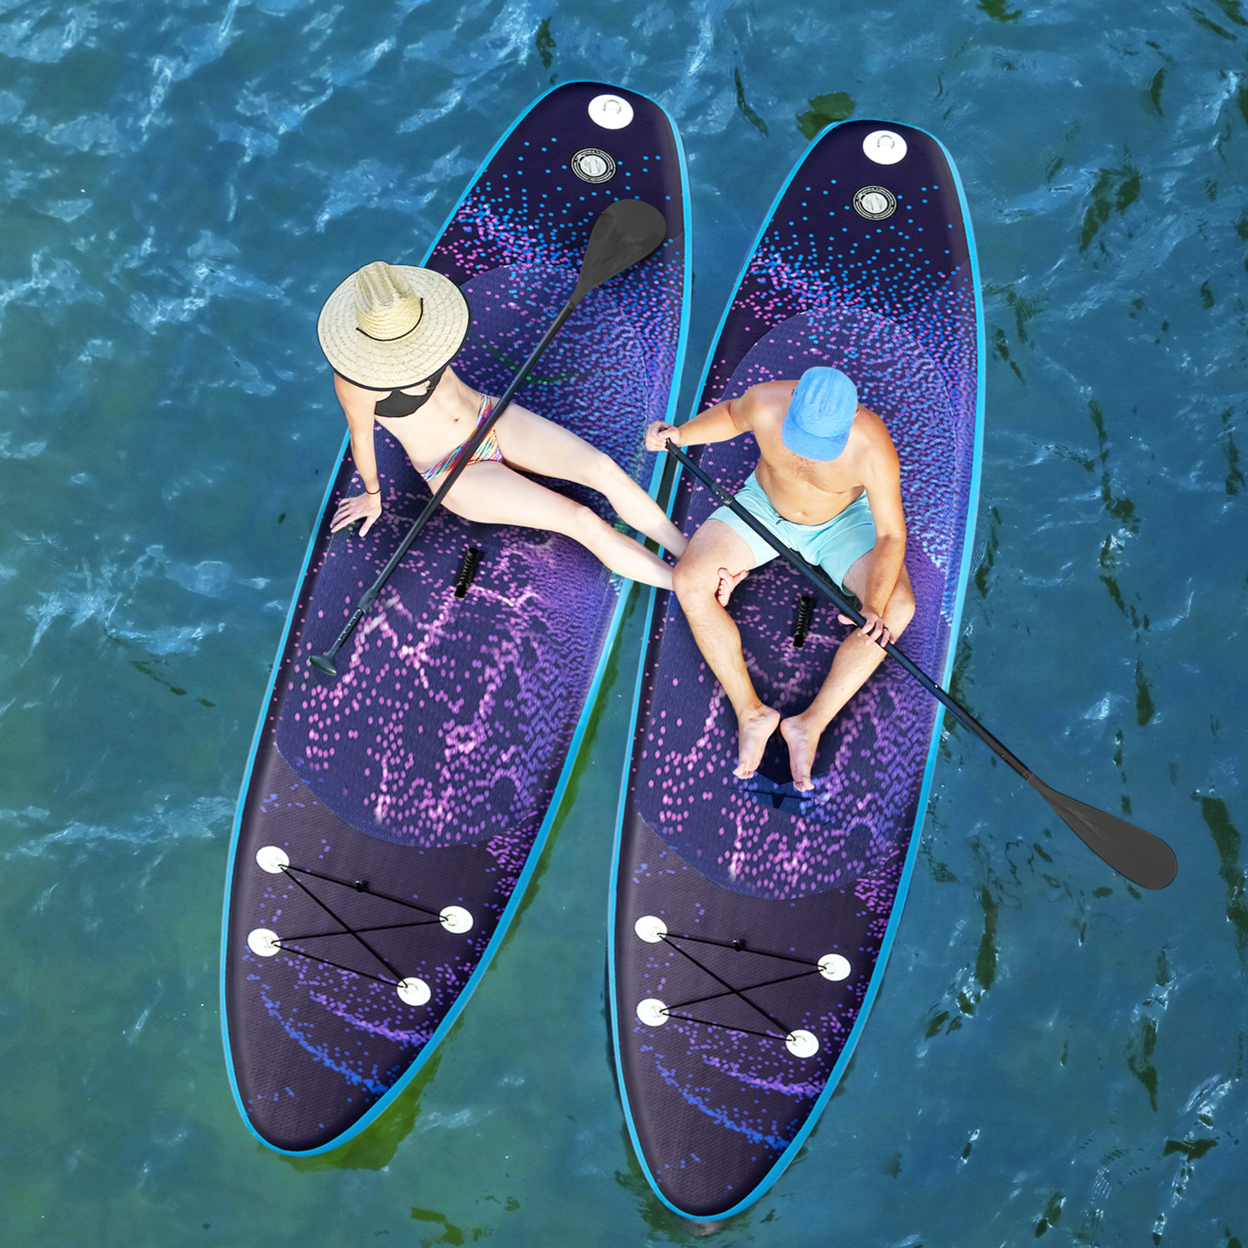 11 Ft Inflatable Stand-Up Paddle Board Non-Slip Deck Surfboard W/ Hand Pump